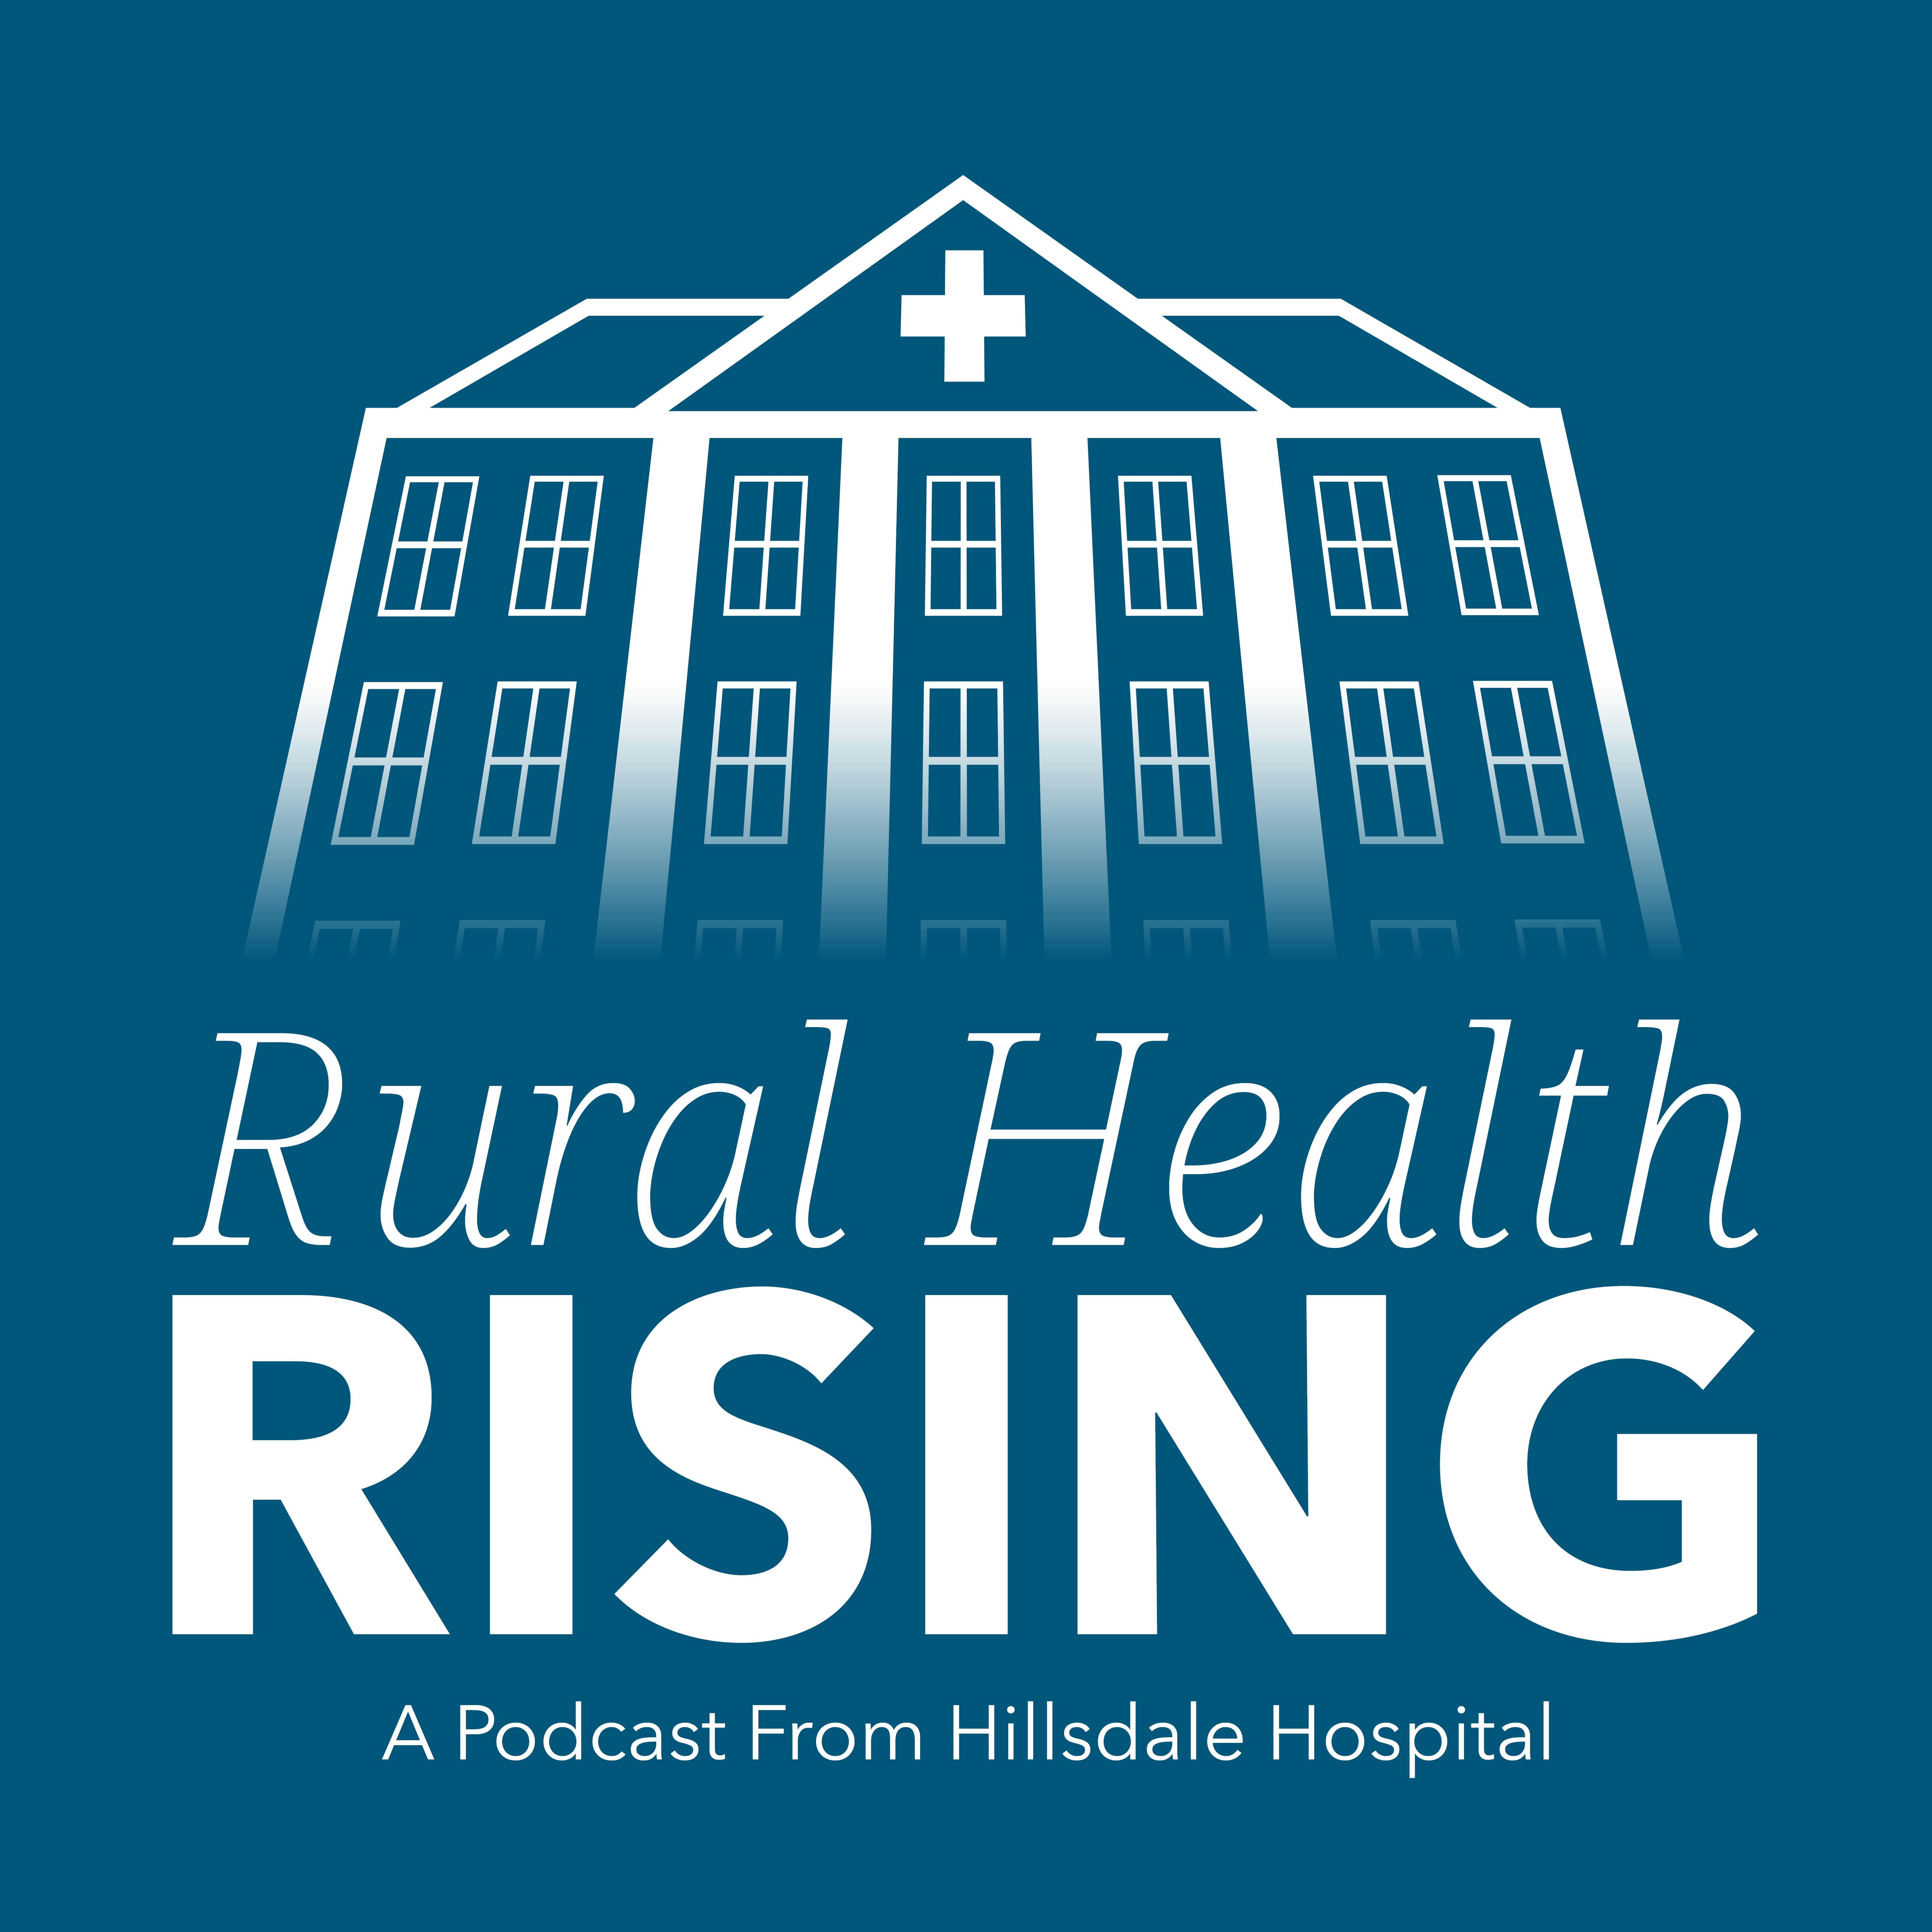 Episode 153: Helping Children with Autism Thrive, Including in Rural Communities